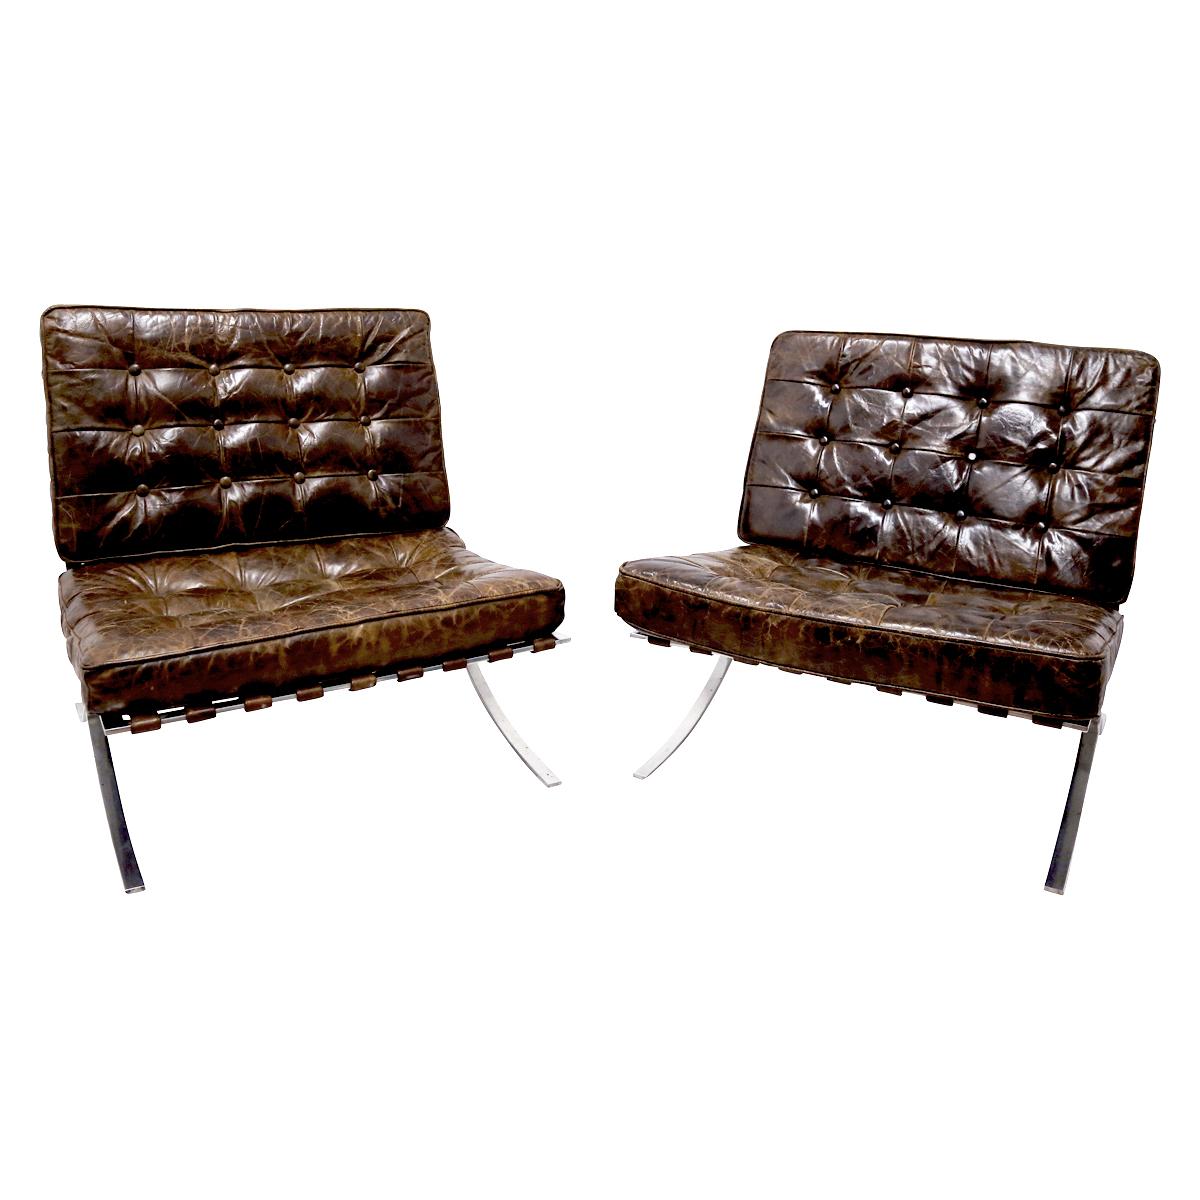 Mid-Century Modern Rare Pair of Brown Distressed Leather Barcelona Chairs by Mies van der Rohe